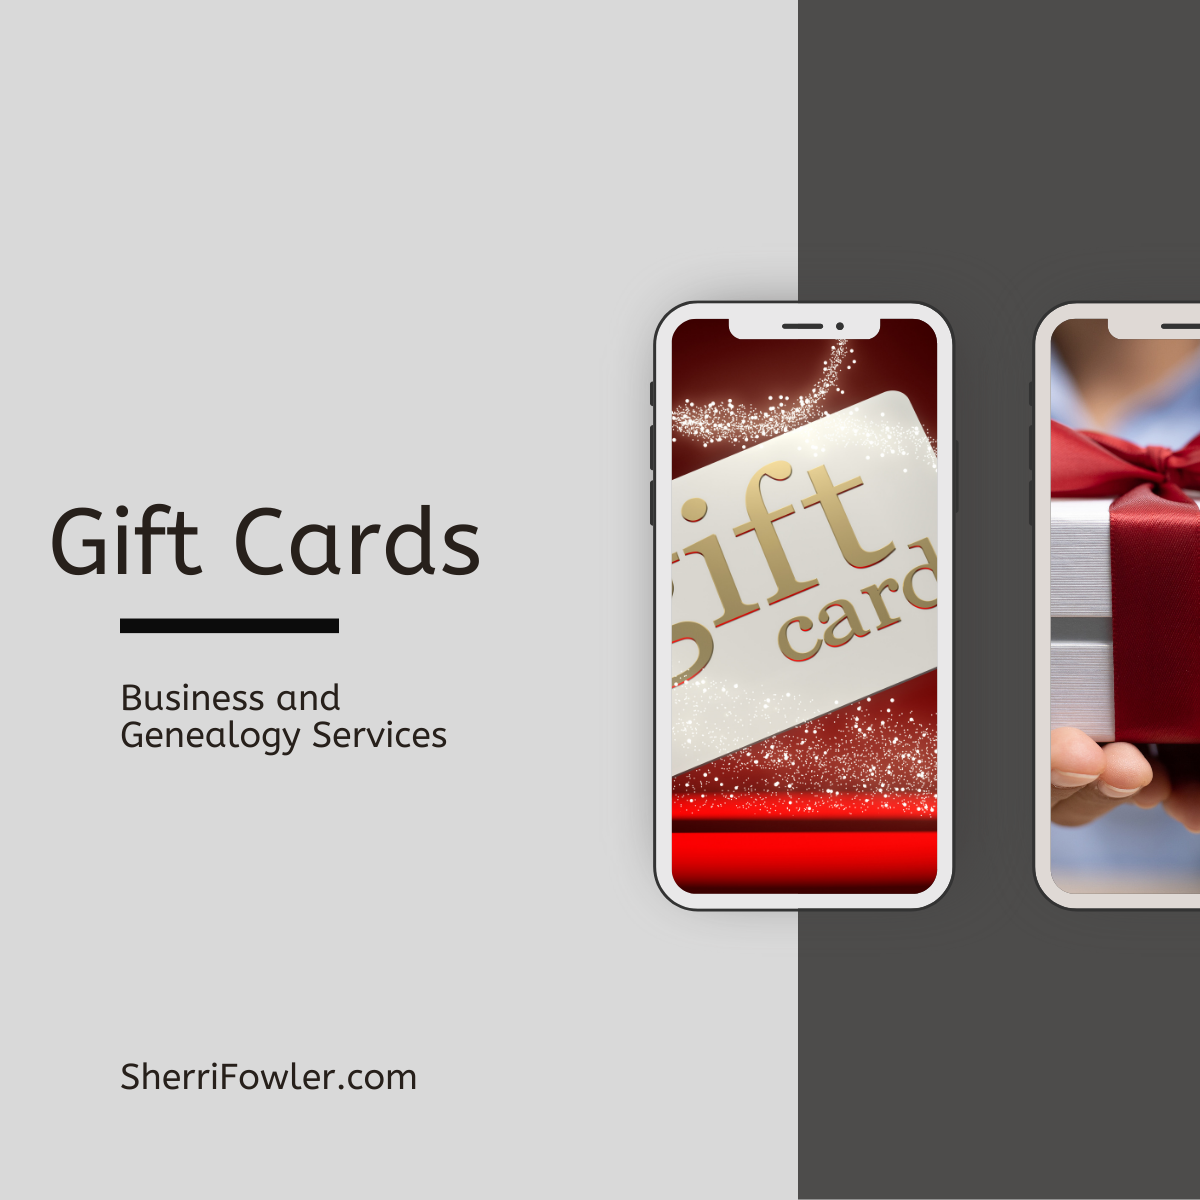 Purchase Gift Cards for small business owners and genealogy enthusiasts at SherriFowler.com. Gift cards can be applied to all business services I offer nationwide and all Genealogy services I offer within Ohio, Kentucky, and West Virginia.